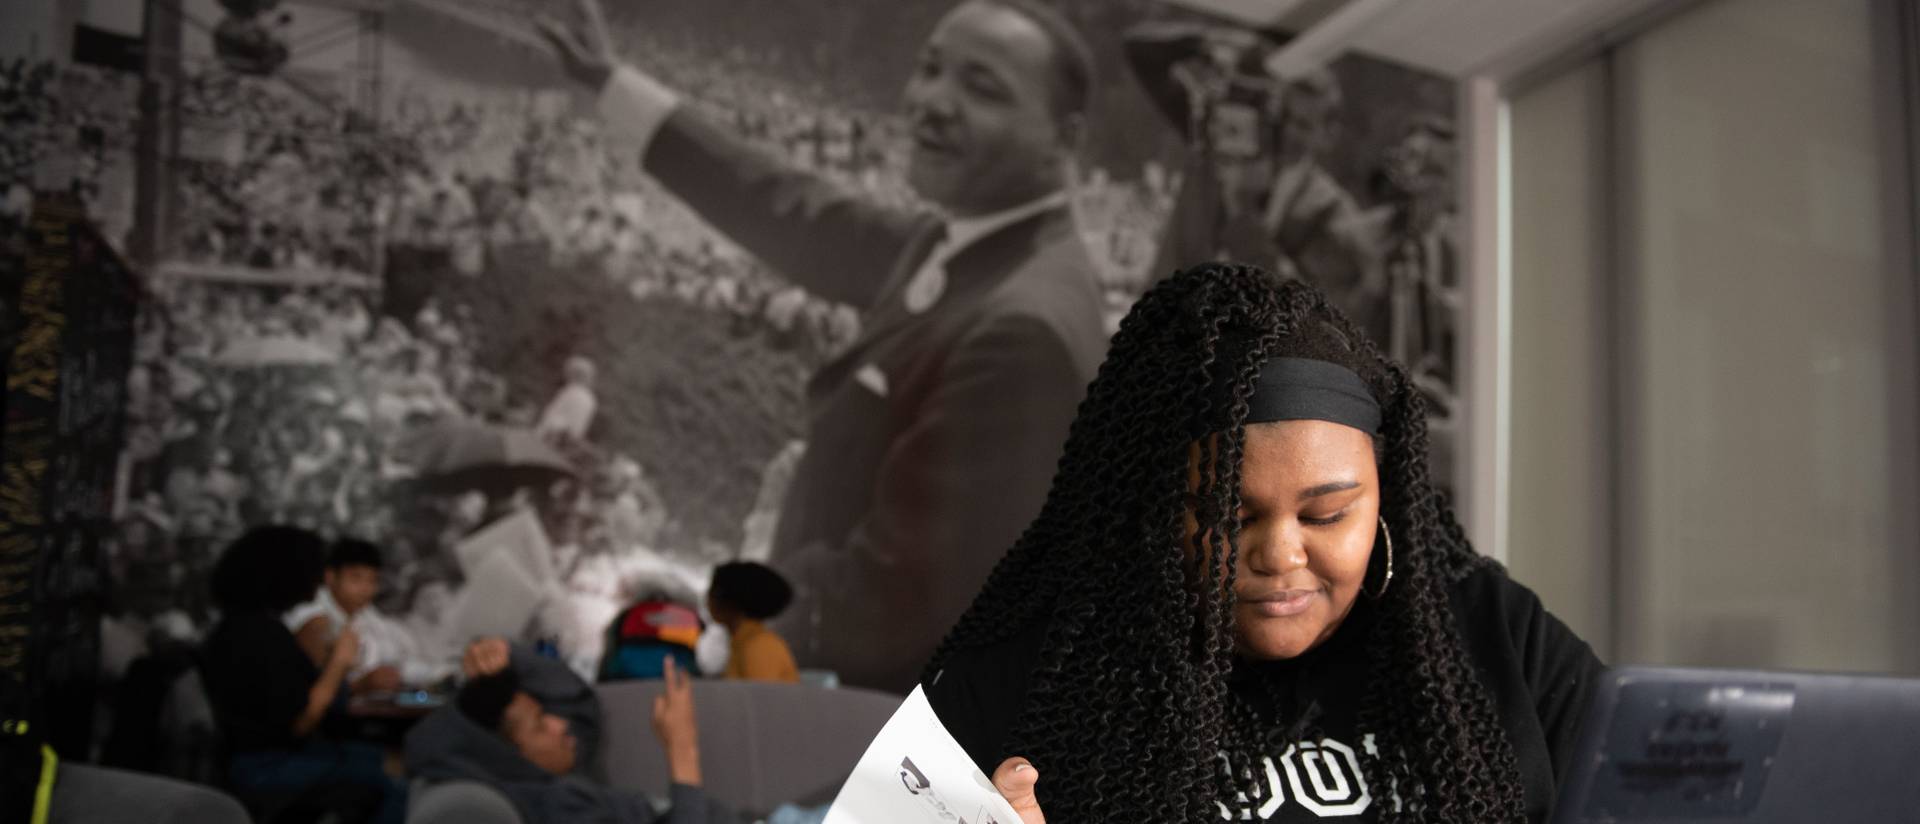 female student studying in the Black cultural center, photo mural of MLK on the wall in the background